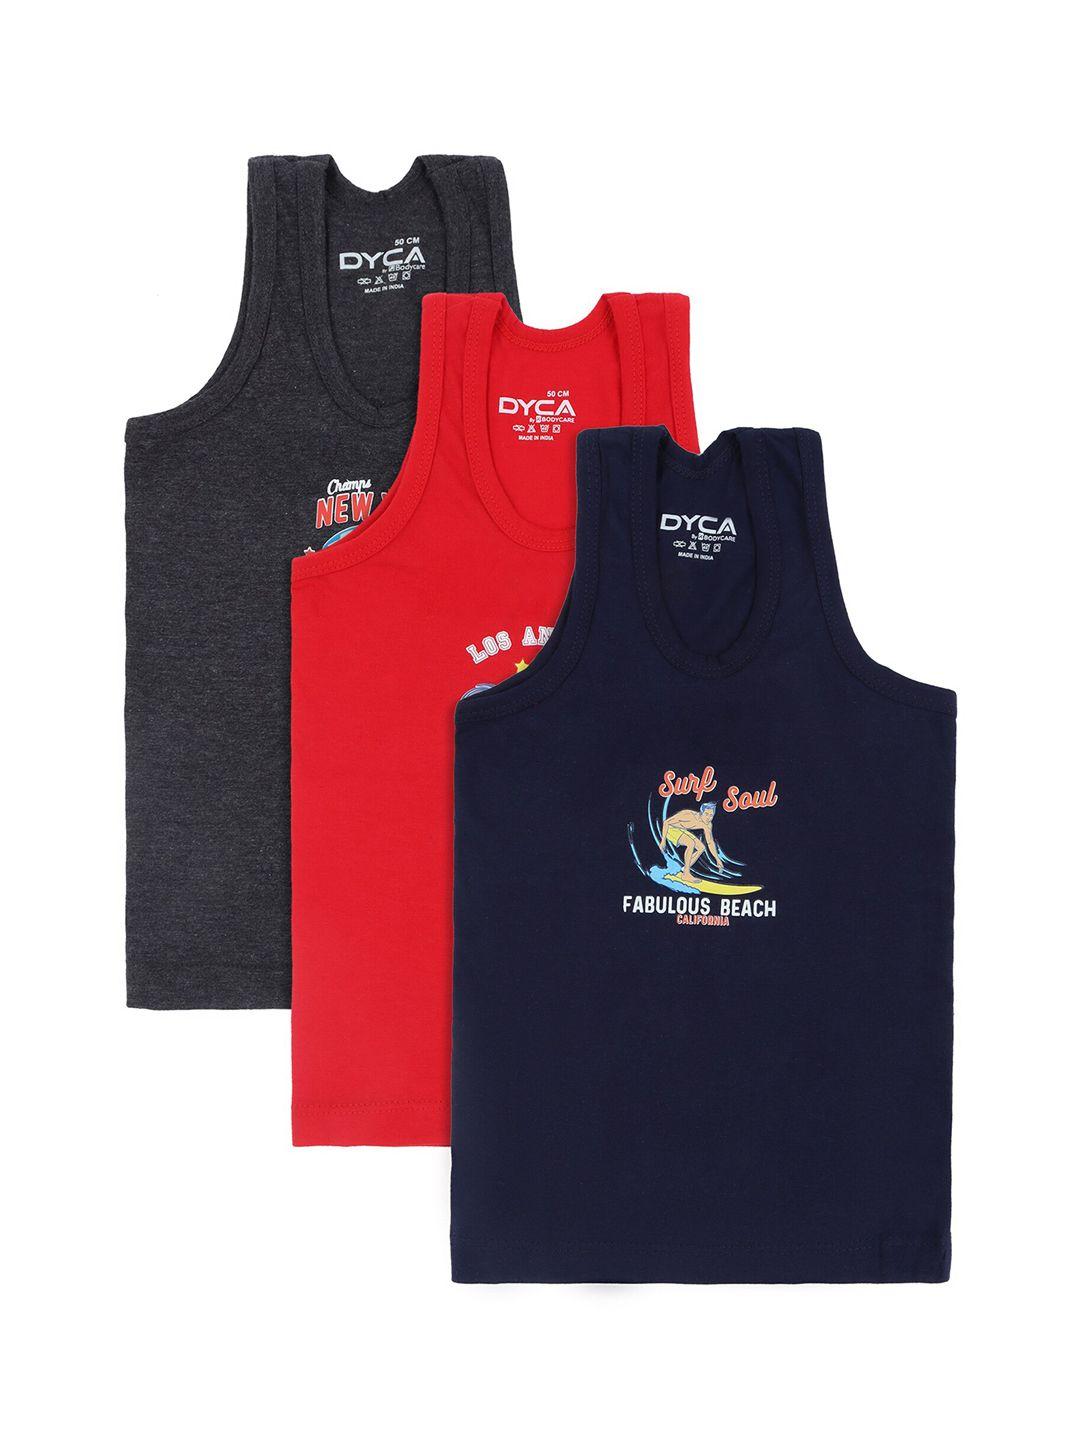 dyca-boys-pack-of-3-assorted-cotton-innerwear-vests